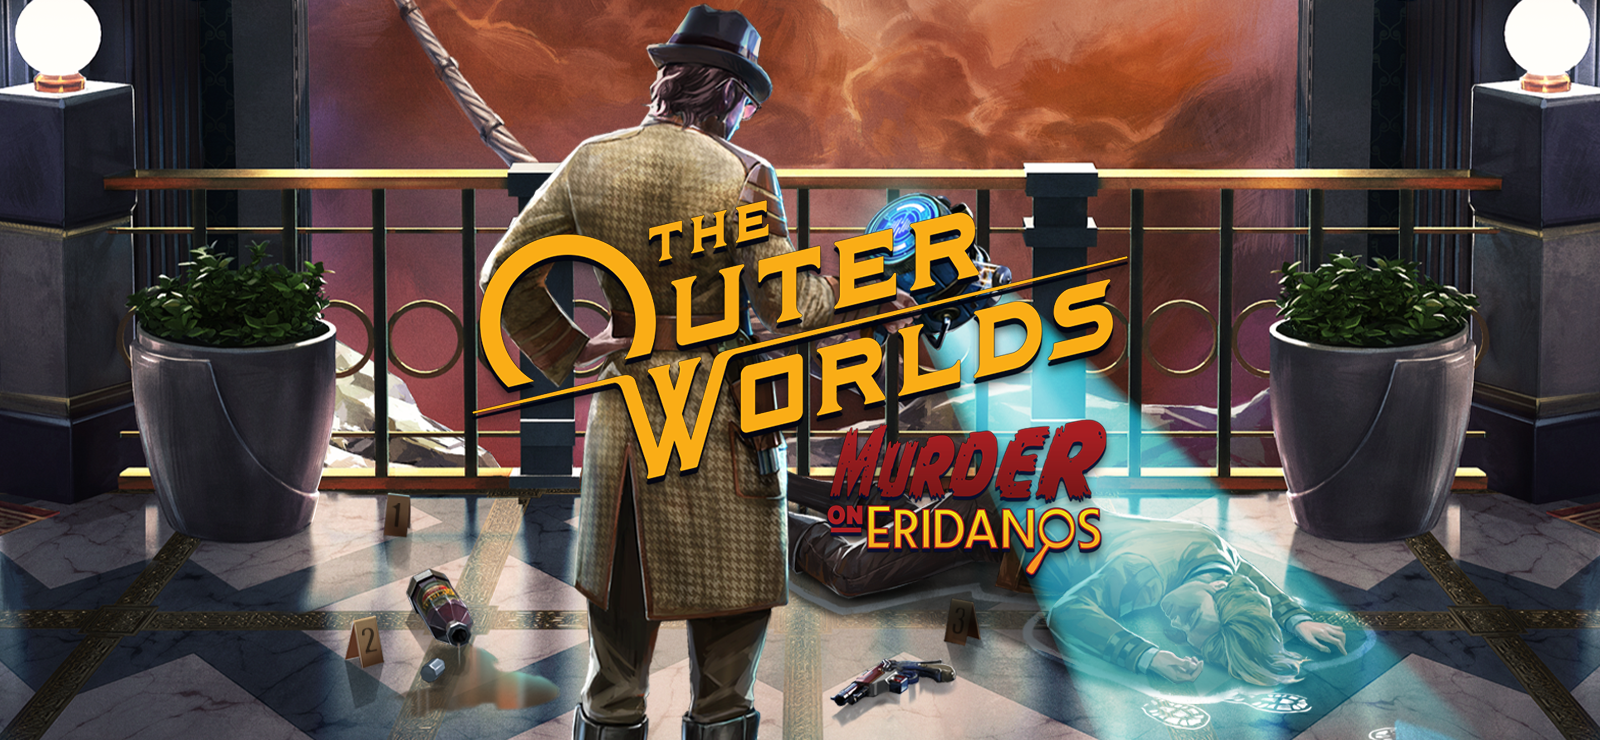 The Outer Worlds: Murder On Eridanos